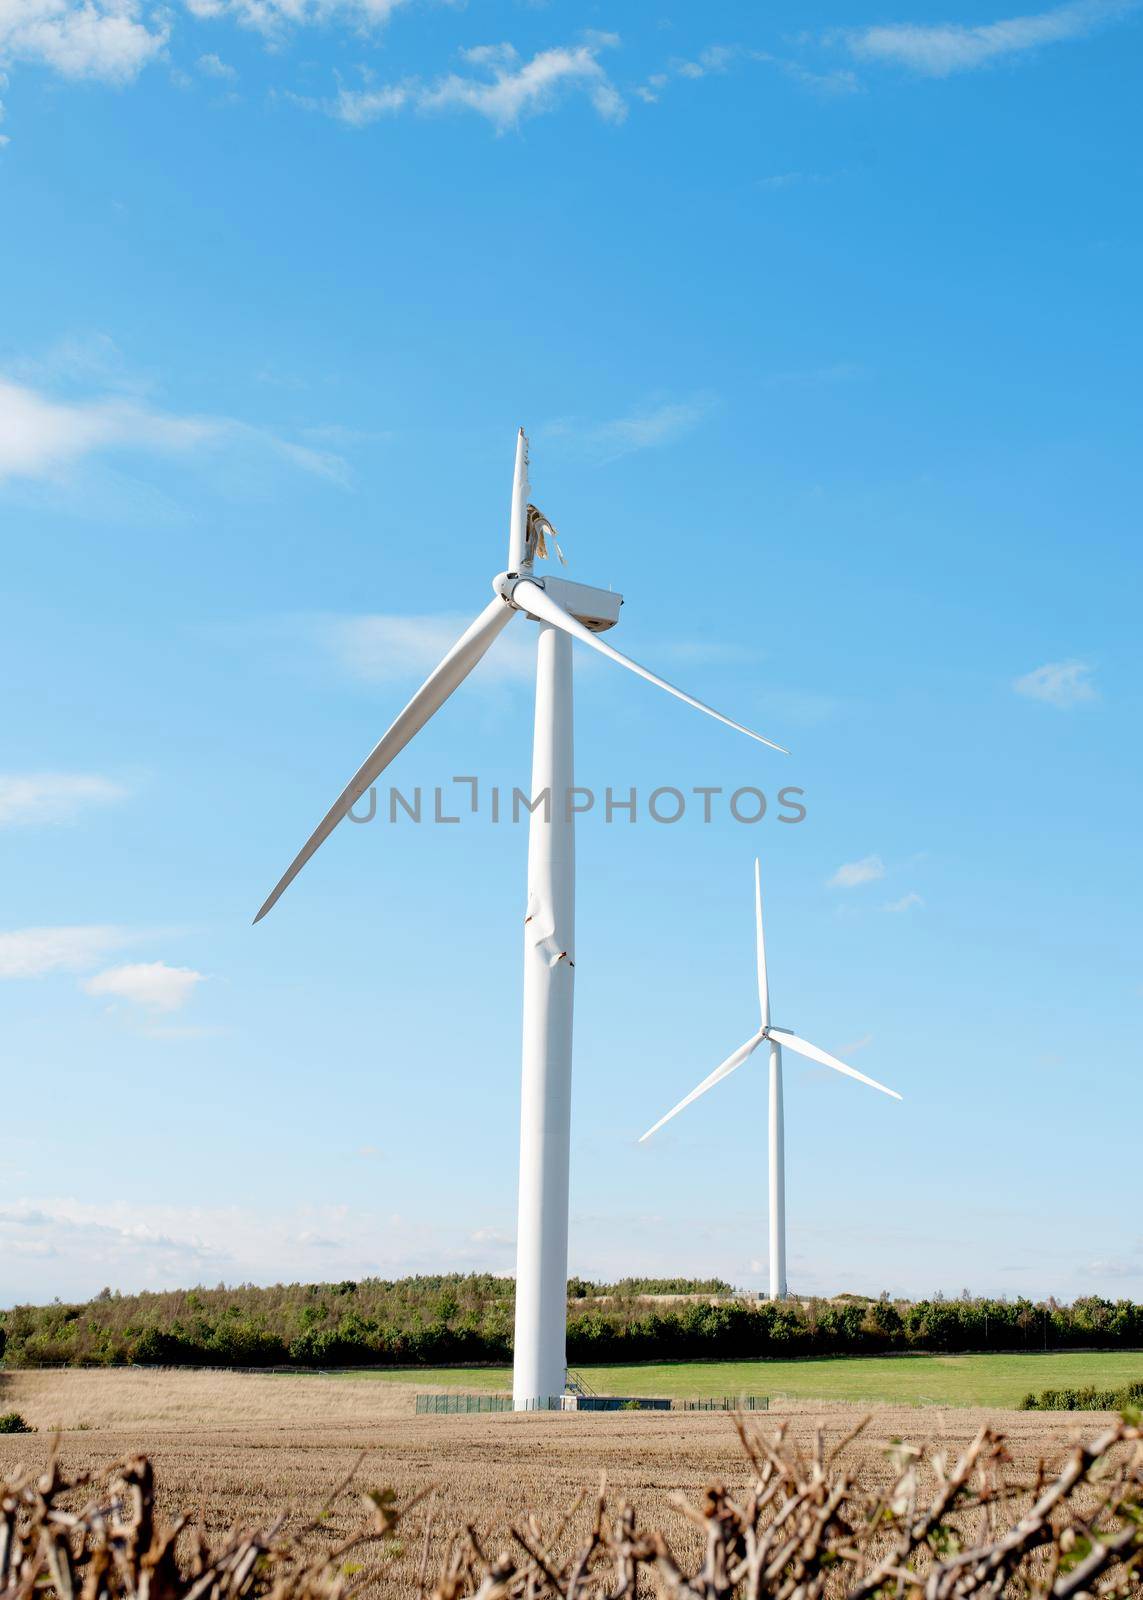 Electricity power wind turbine with broken blade and damaged tower awaiting repair after accident.